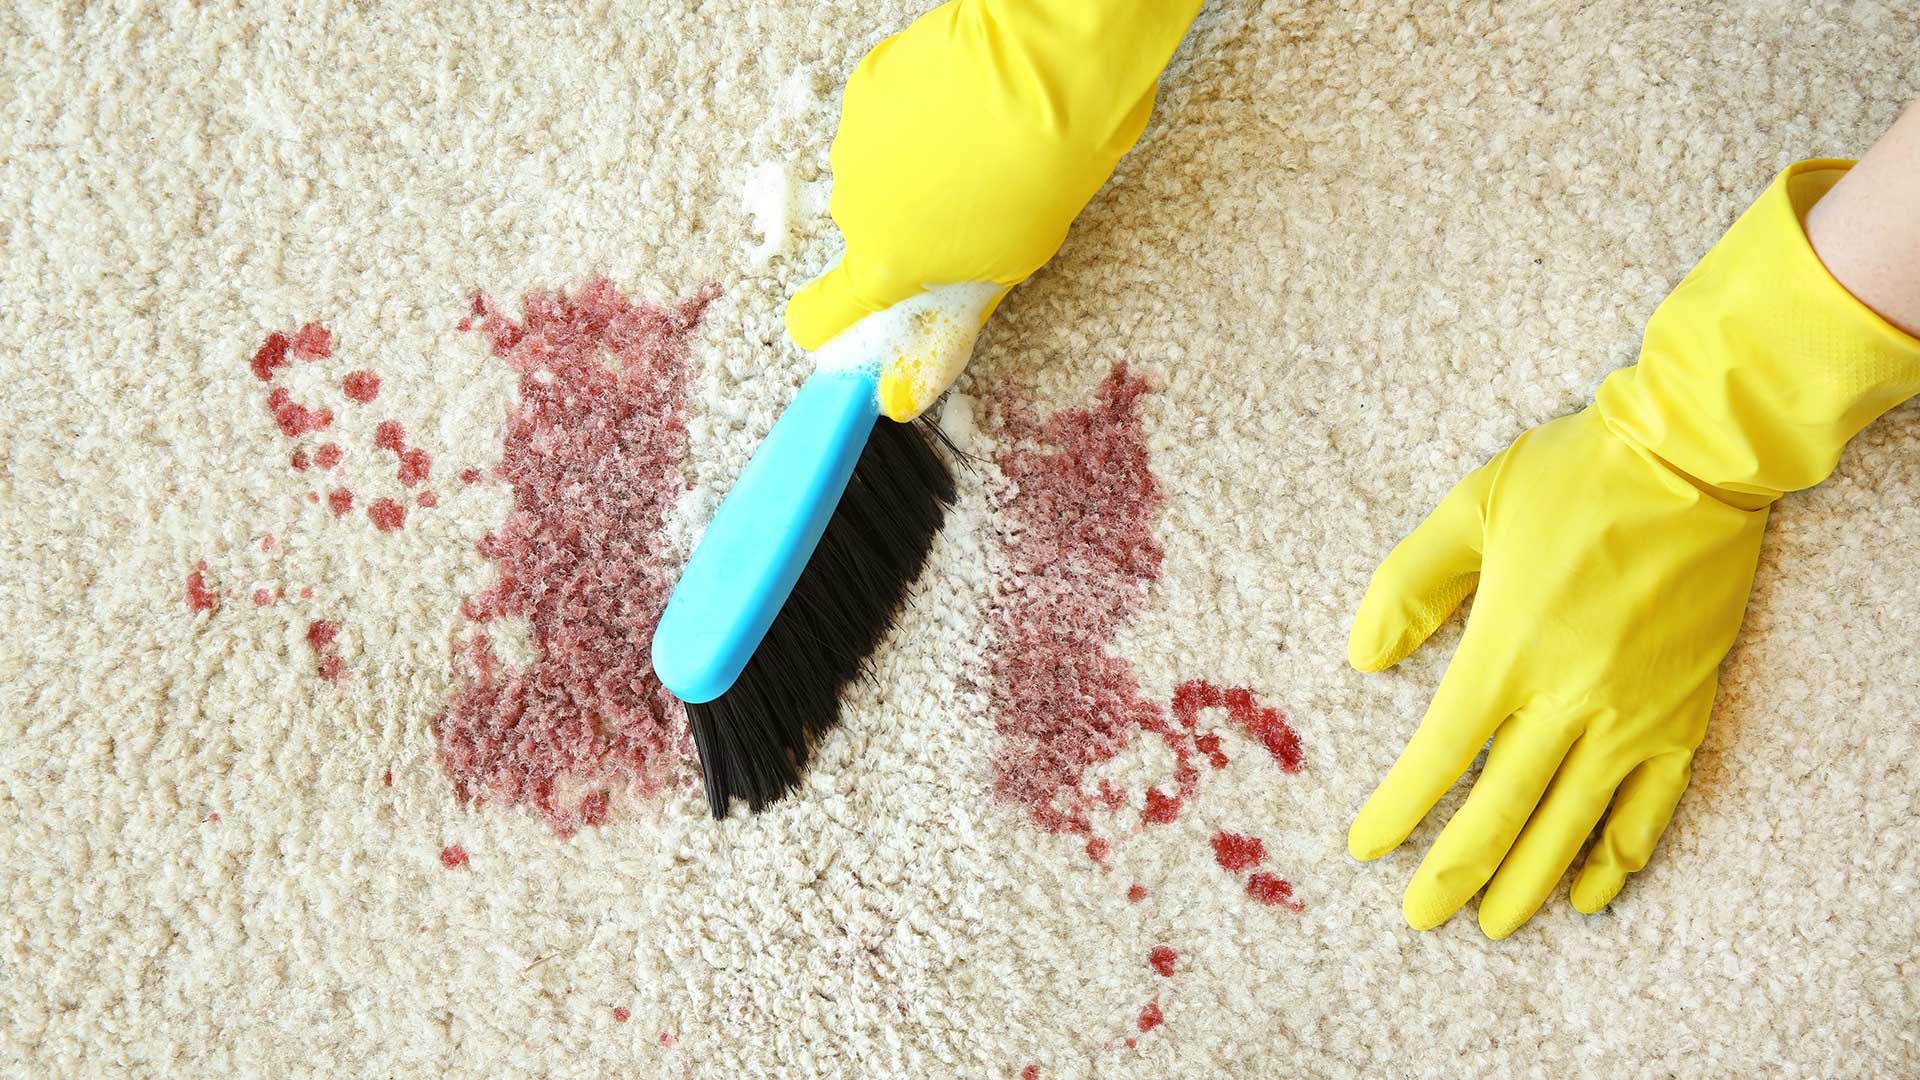 Gloved hands holding a brush and cleaning blood on carpet